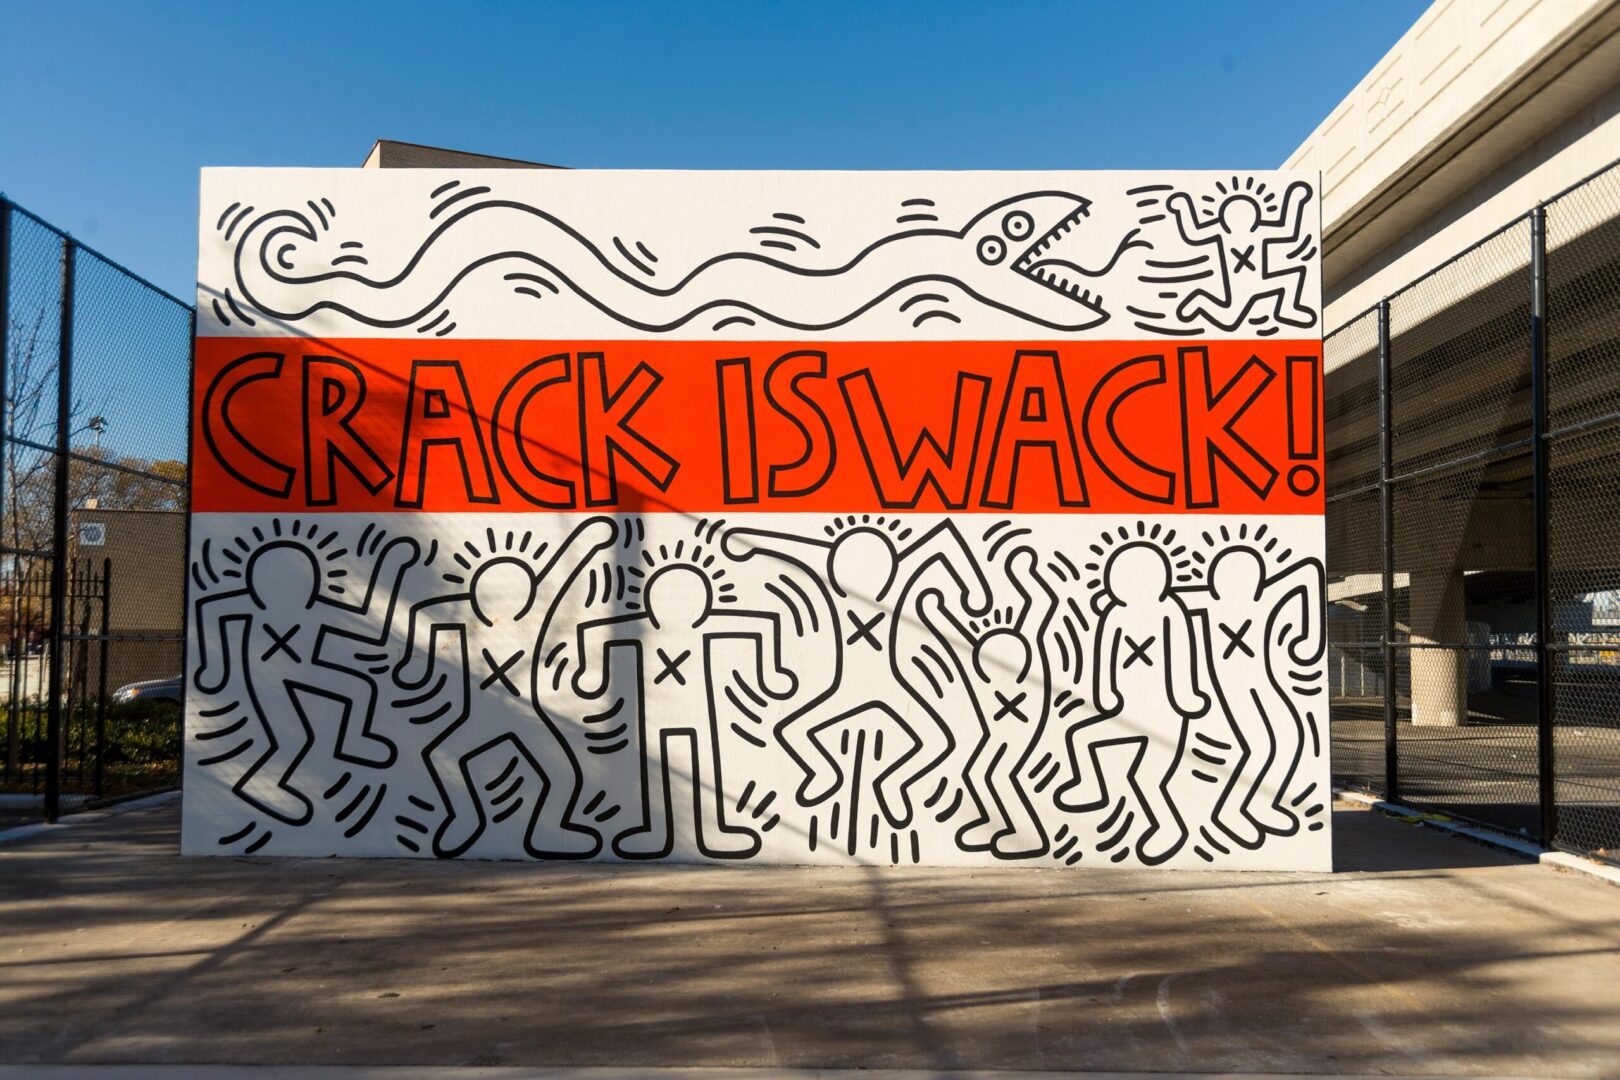 Public anti-drug mural with the slogan "crack is wack!" featuring stylized figures and patterns.